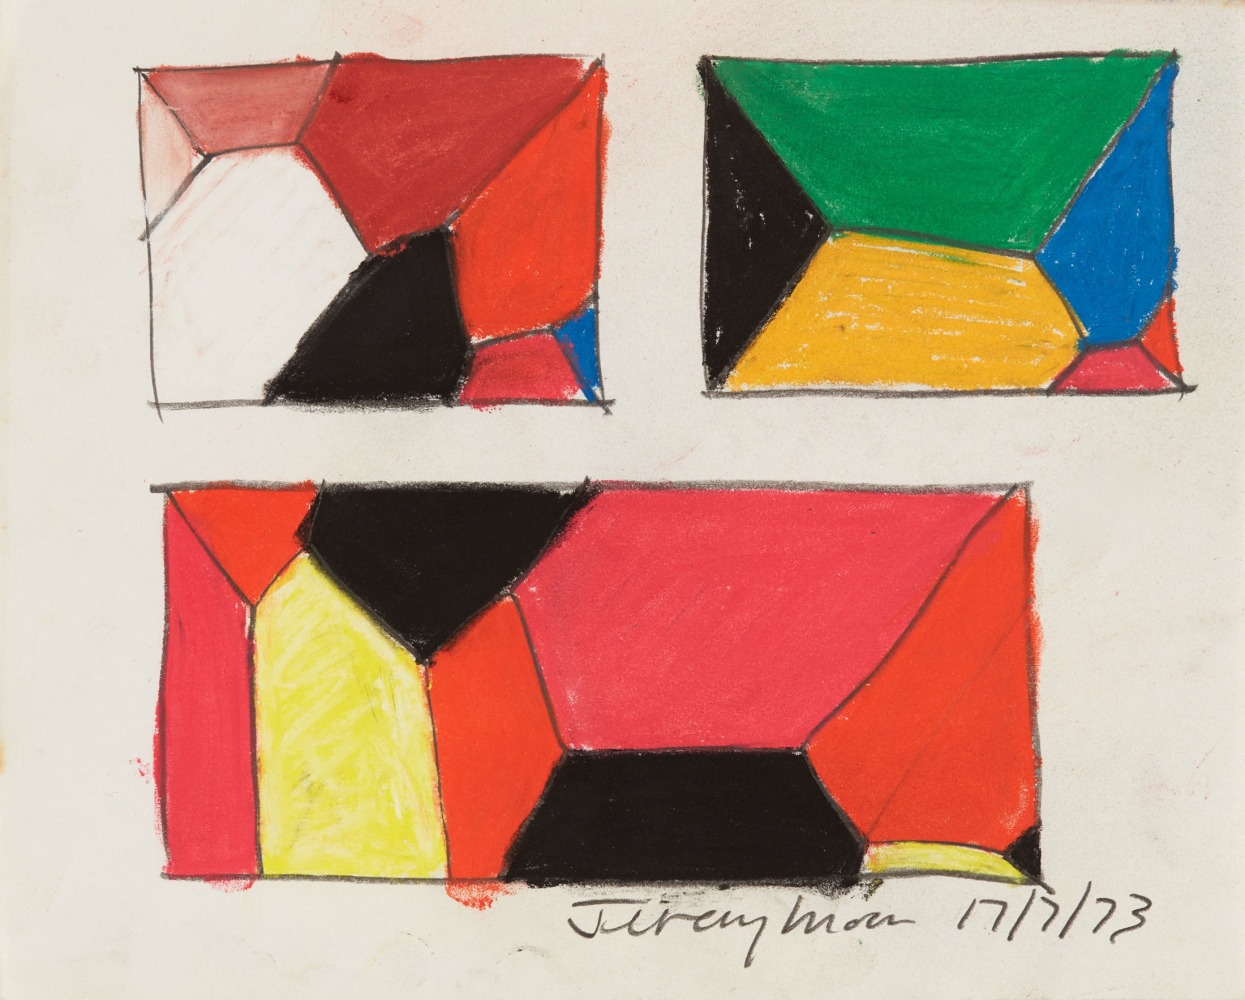 Jeremy Moon
Drawing [17/7/73], 1973
Pastel and pencil on paper
8 x 10 inches
(20.3 x 25.4 cm)